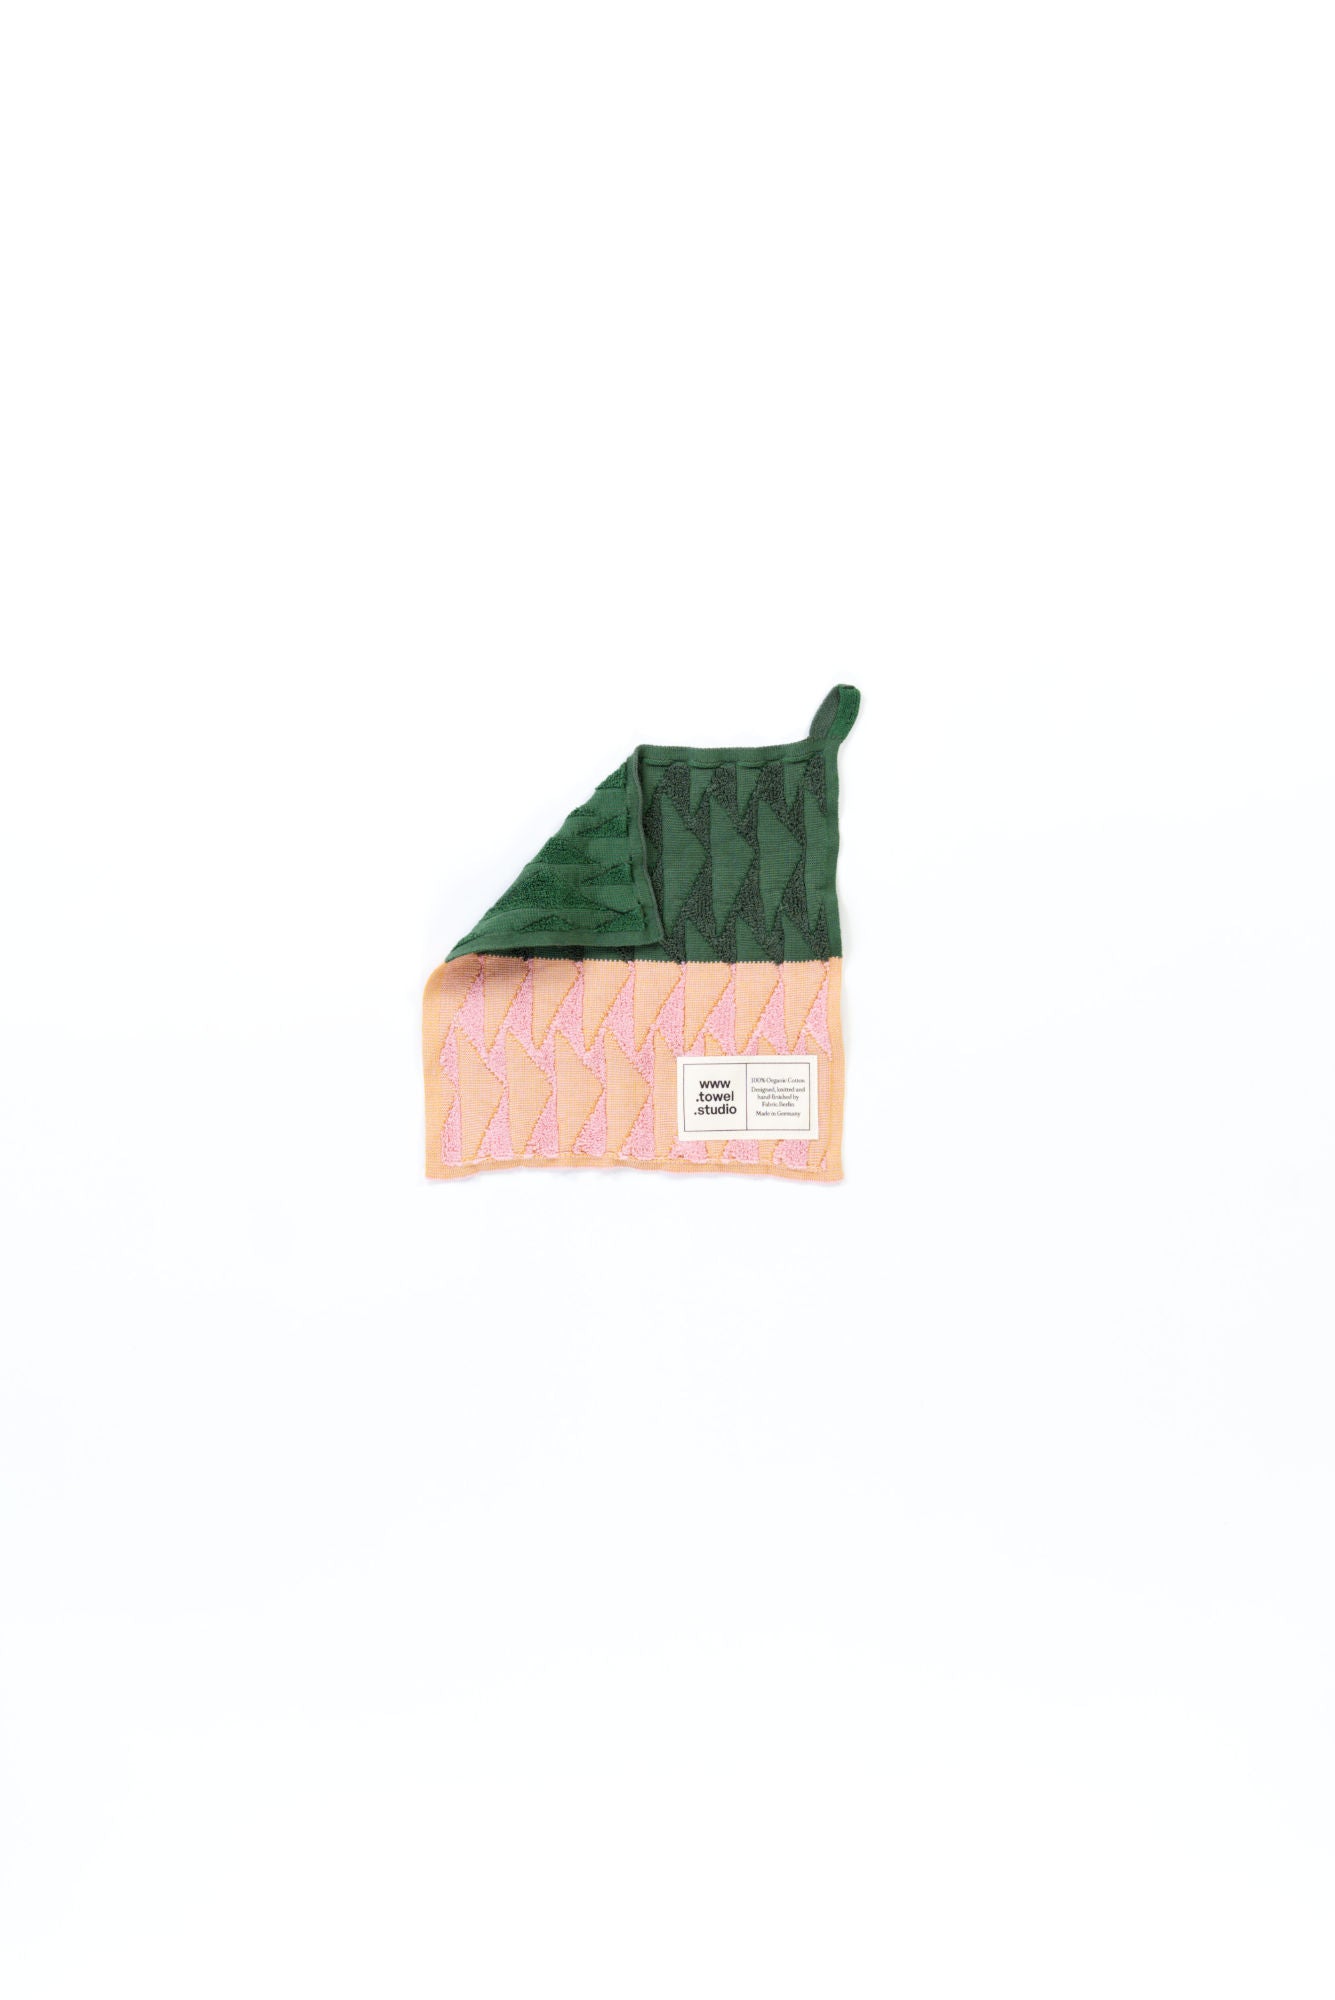 Forest Towel | Apricot Leaf